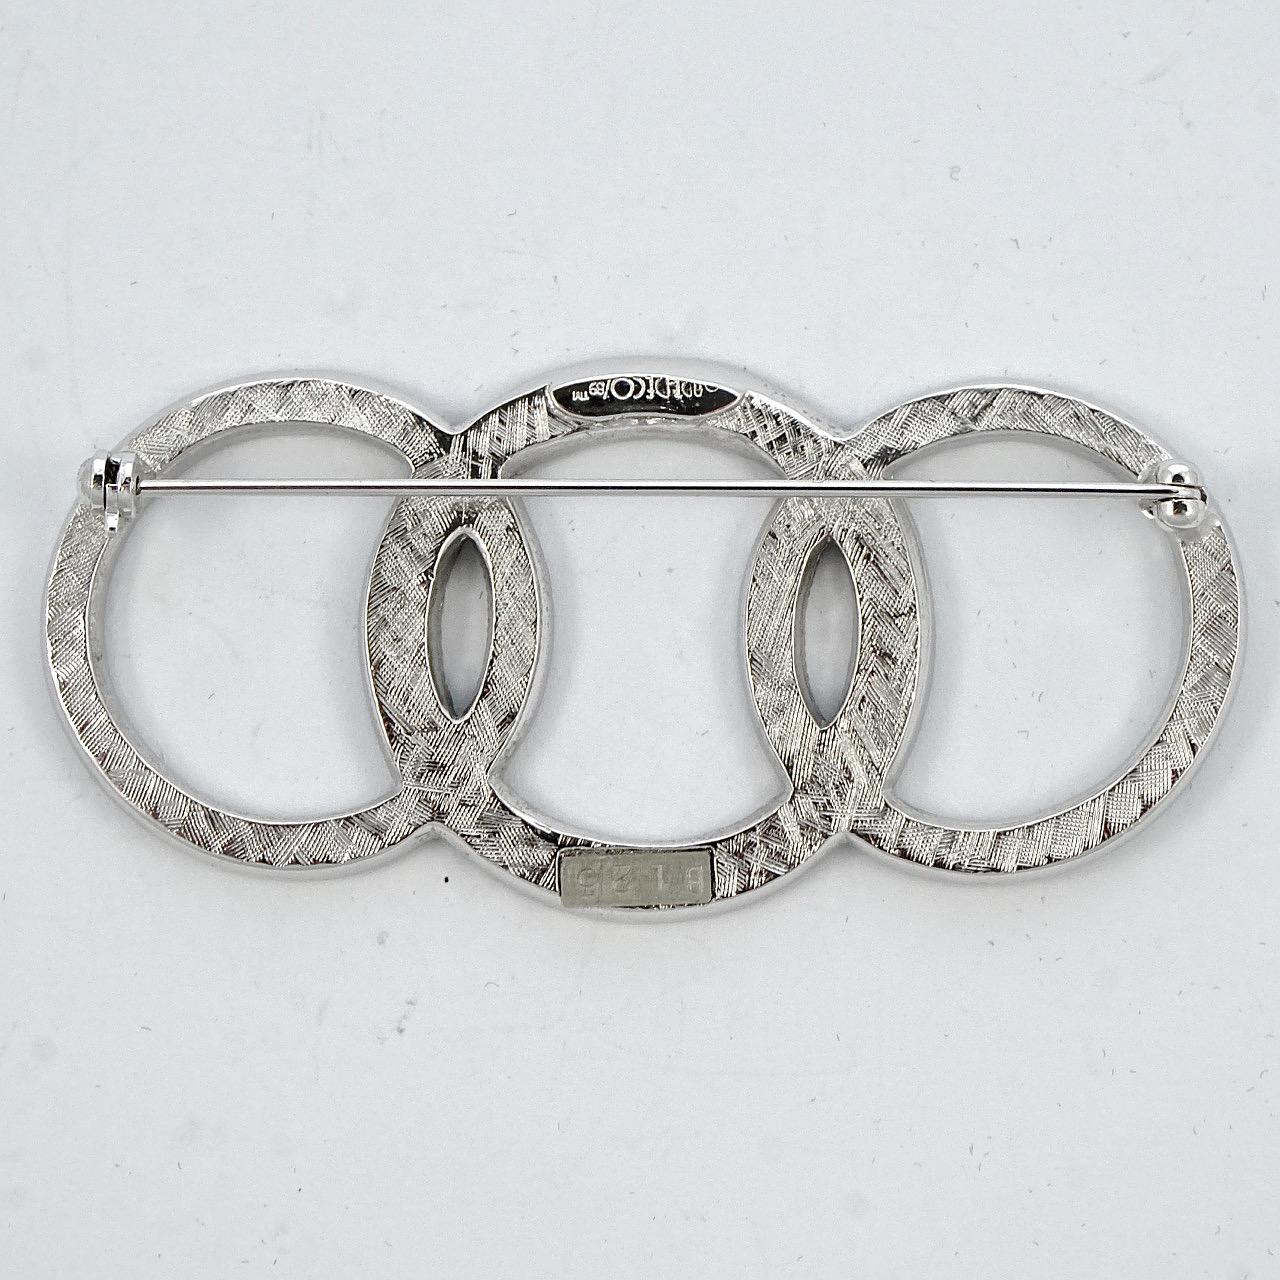 Art Deco 89 fabulous classic silver tone brooch, featuring three intertwined circles embellished with black and clear rhinestones, serial number B125. Measuring length 7.4cm / 2.9 inches by width 3.5cm / 1.37 inch. The brooch is in very good